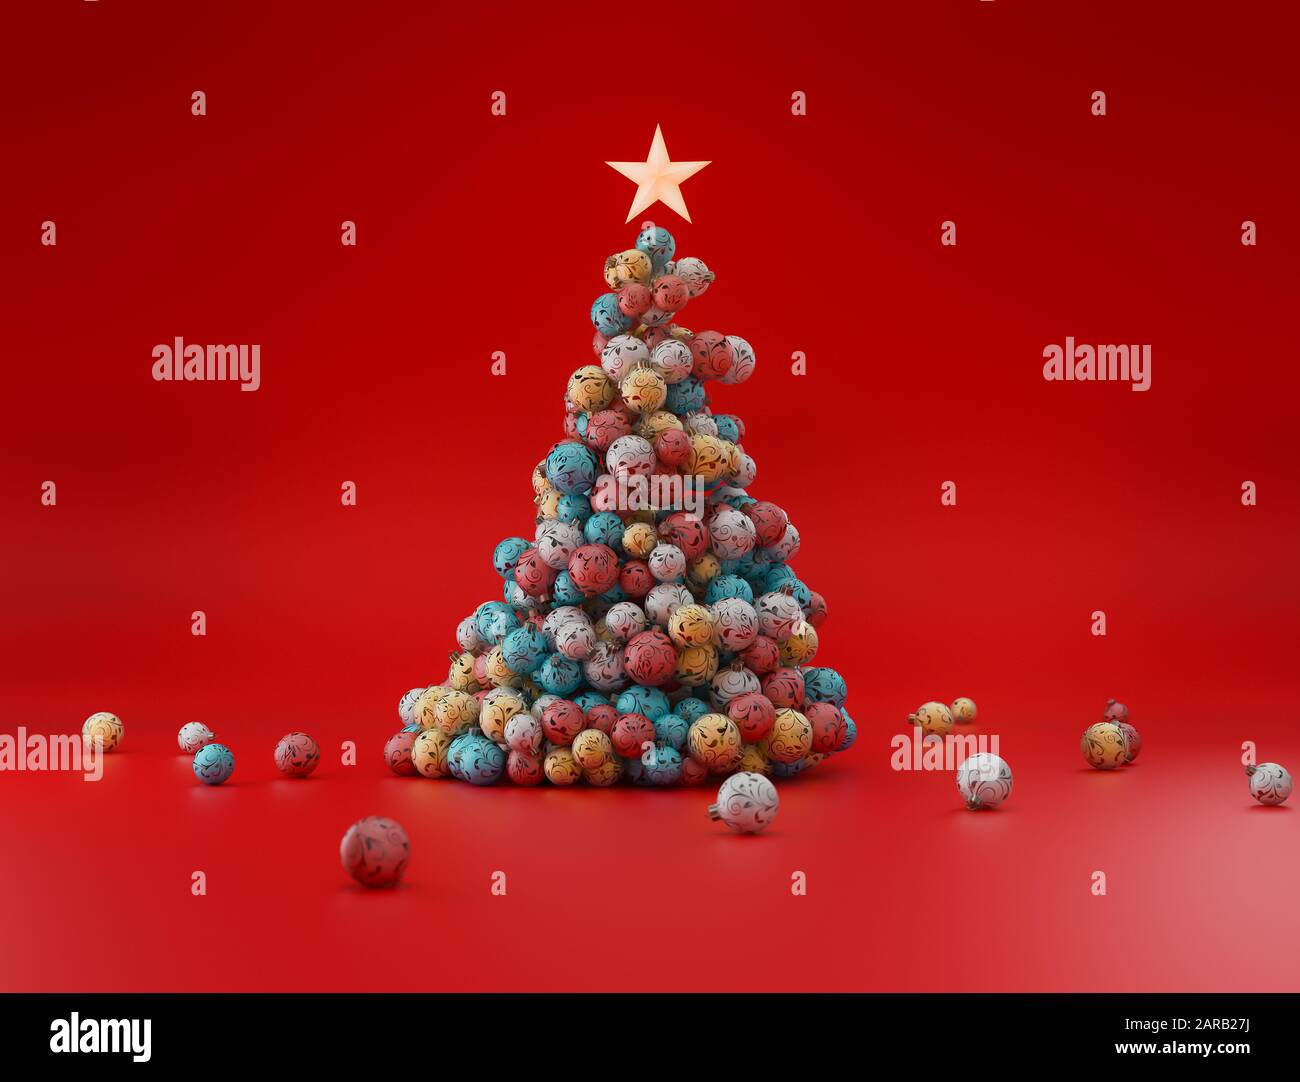 3d Merry Christmas Animation - Stock Motion Graphics